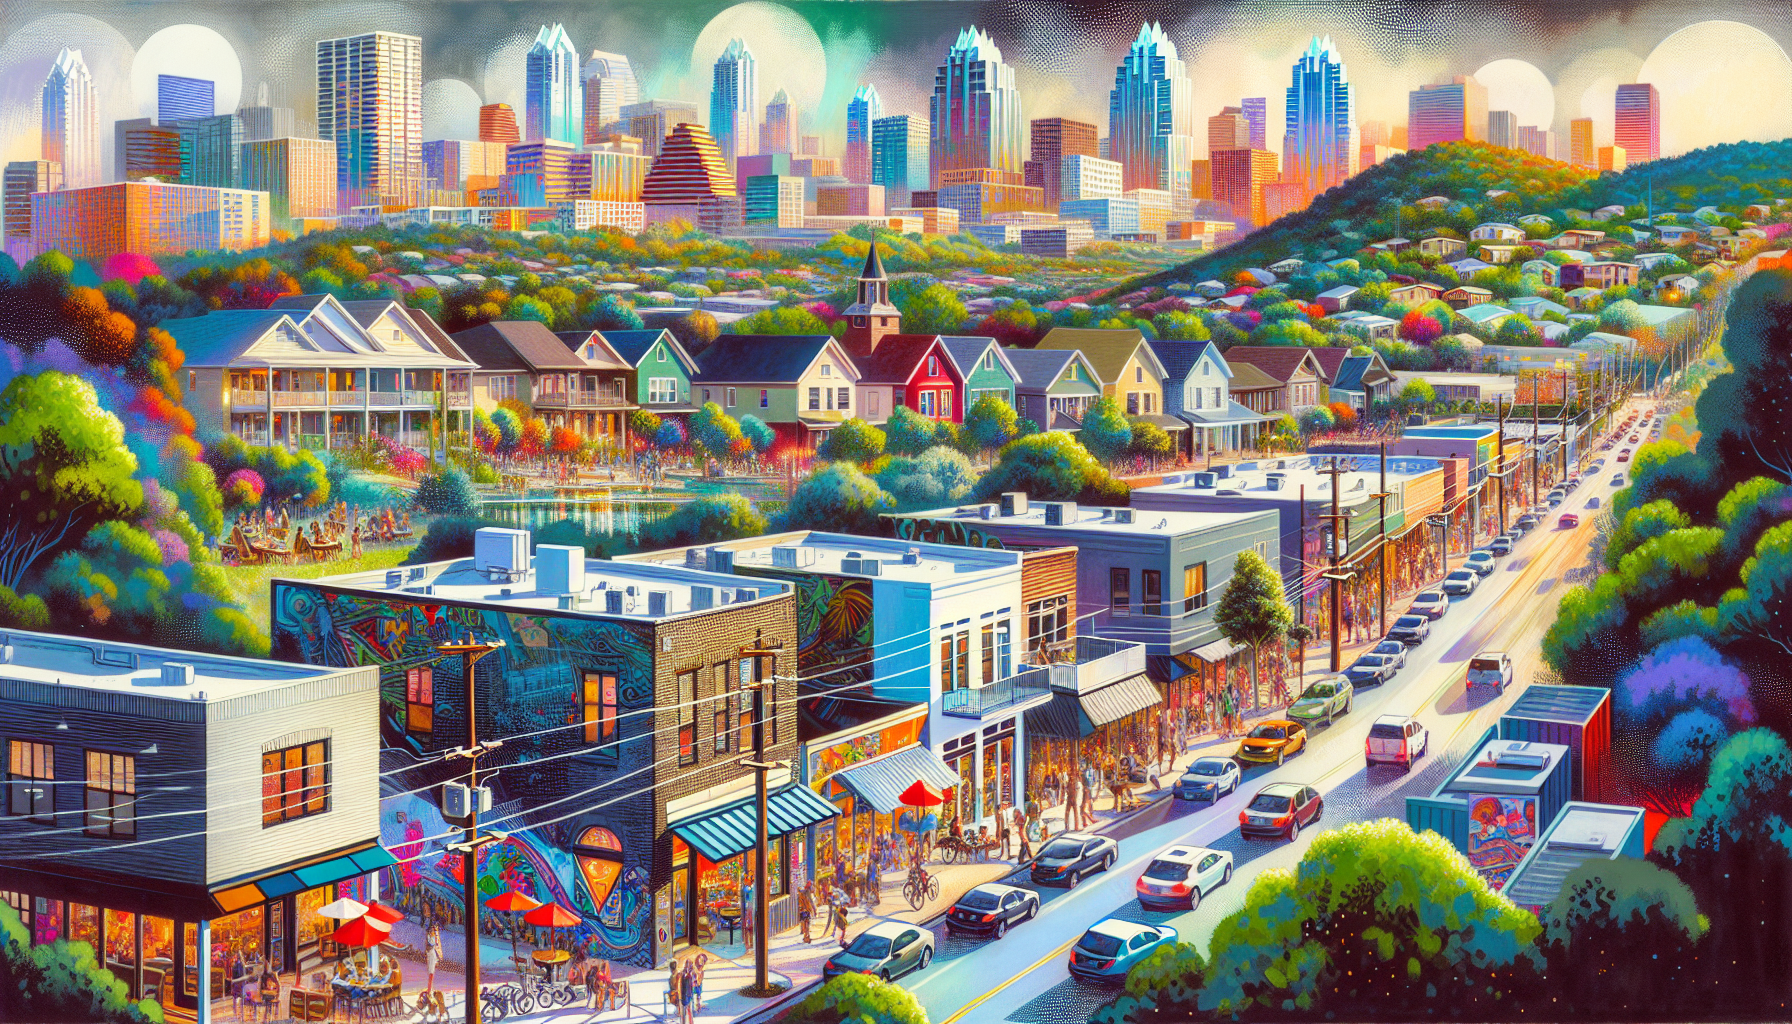 Artistic representation of the urban and suburban blend in South Austin with diverse housing options